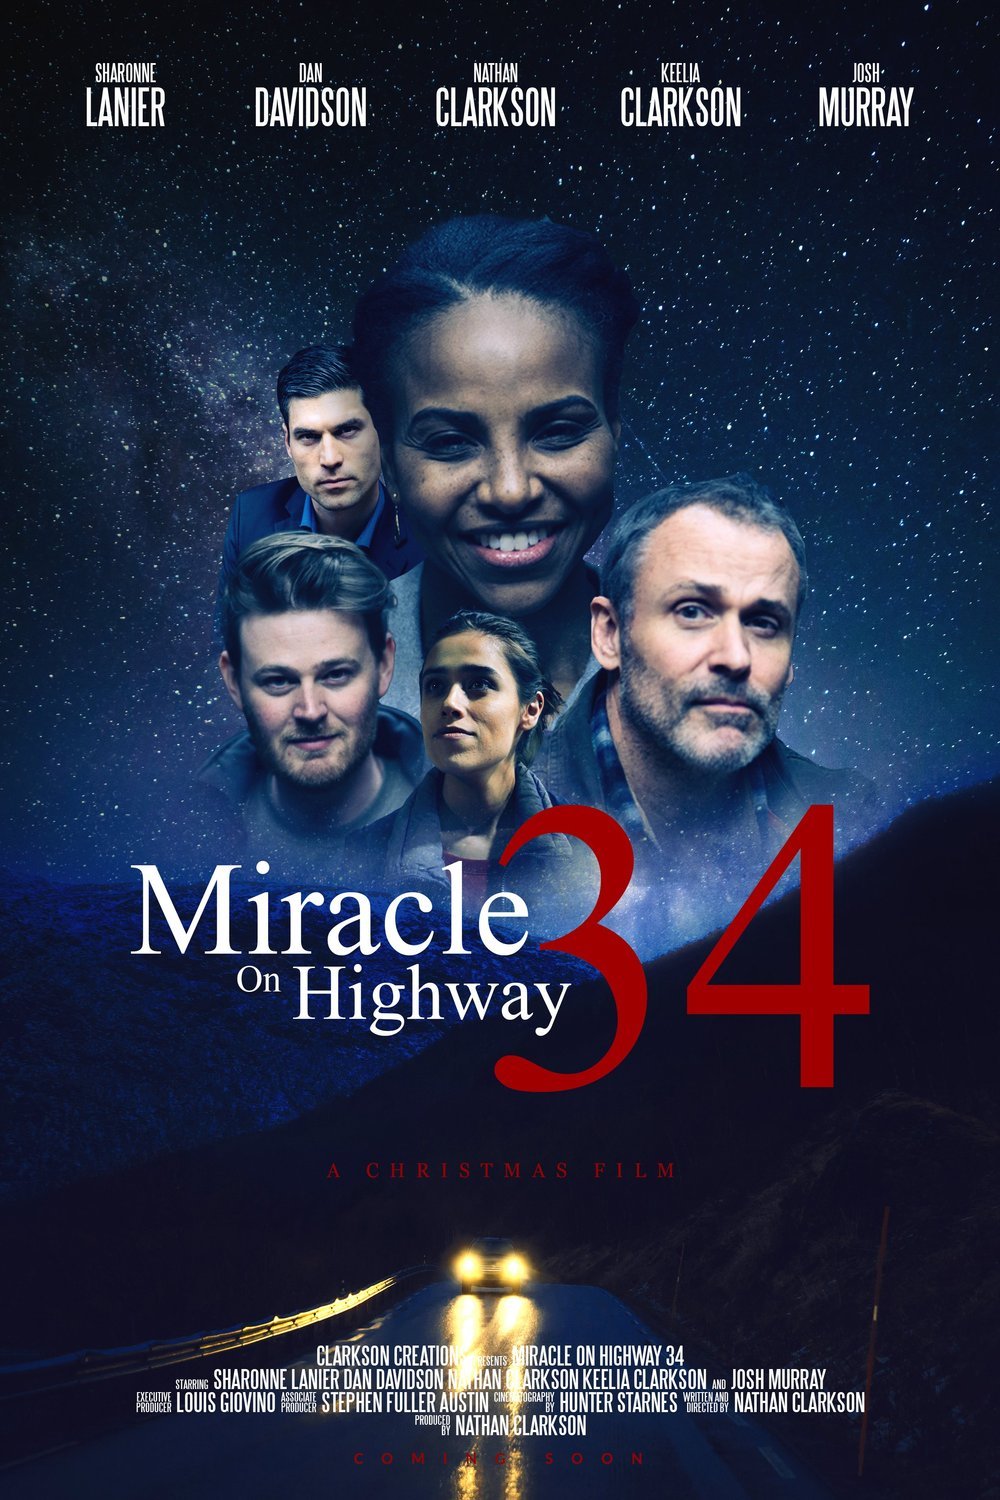 Poster of the movie Miracle on Highway 34